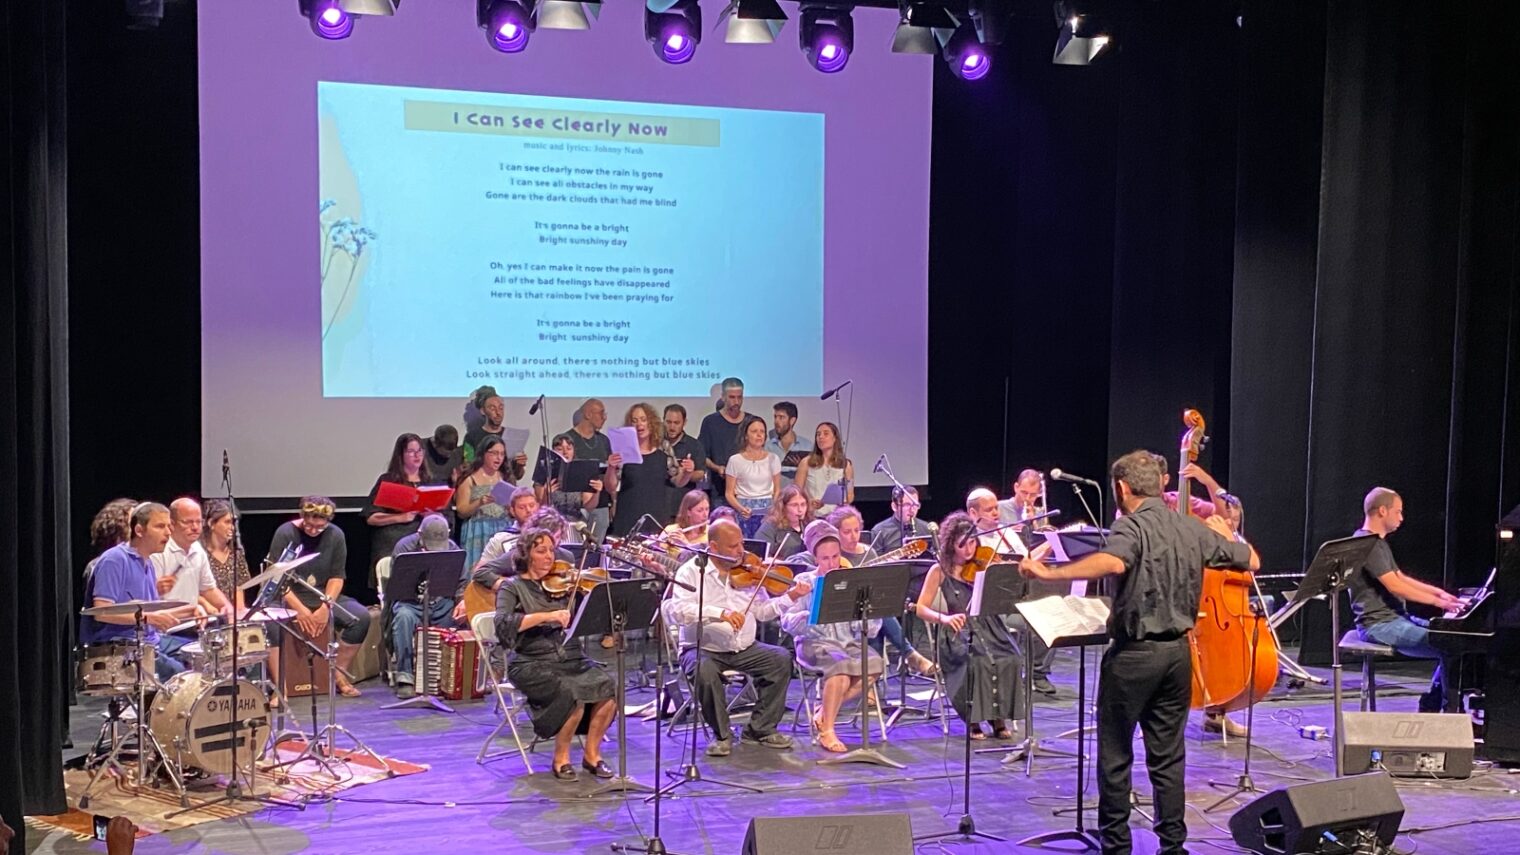 Israel Inclusion Orchestra conductor Ido Marco leading the musicians and vocalists in â€œI Can See Clearly Now.â€� Photo by Abigail Leichman